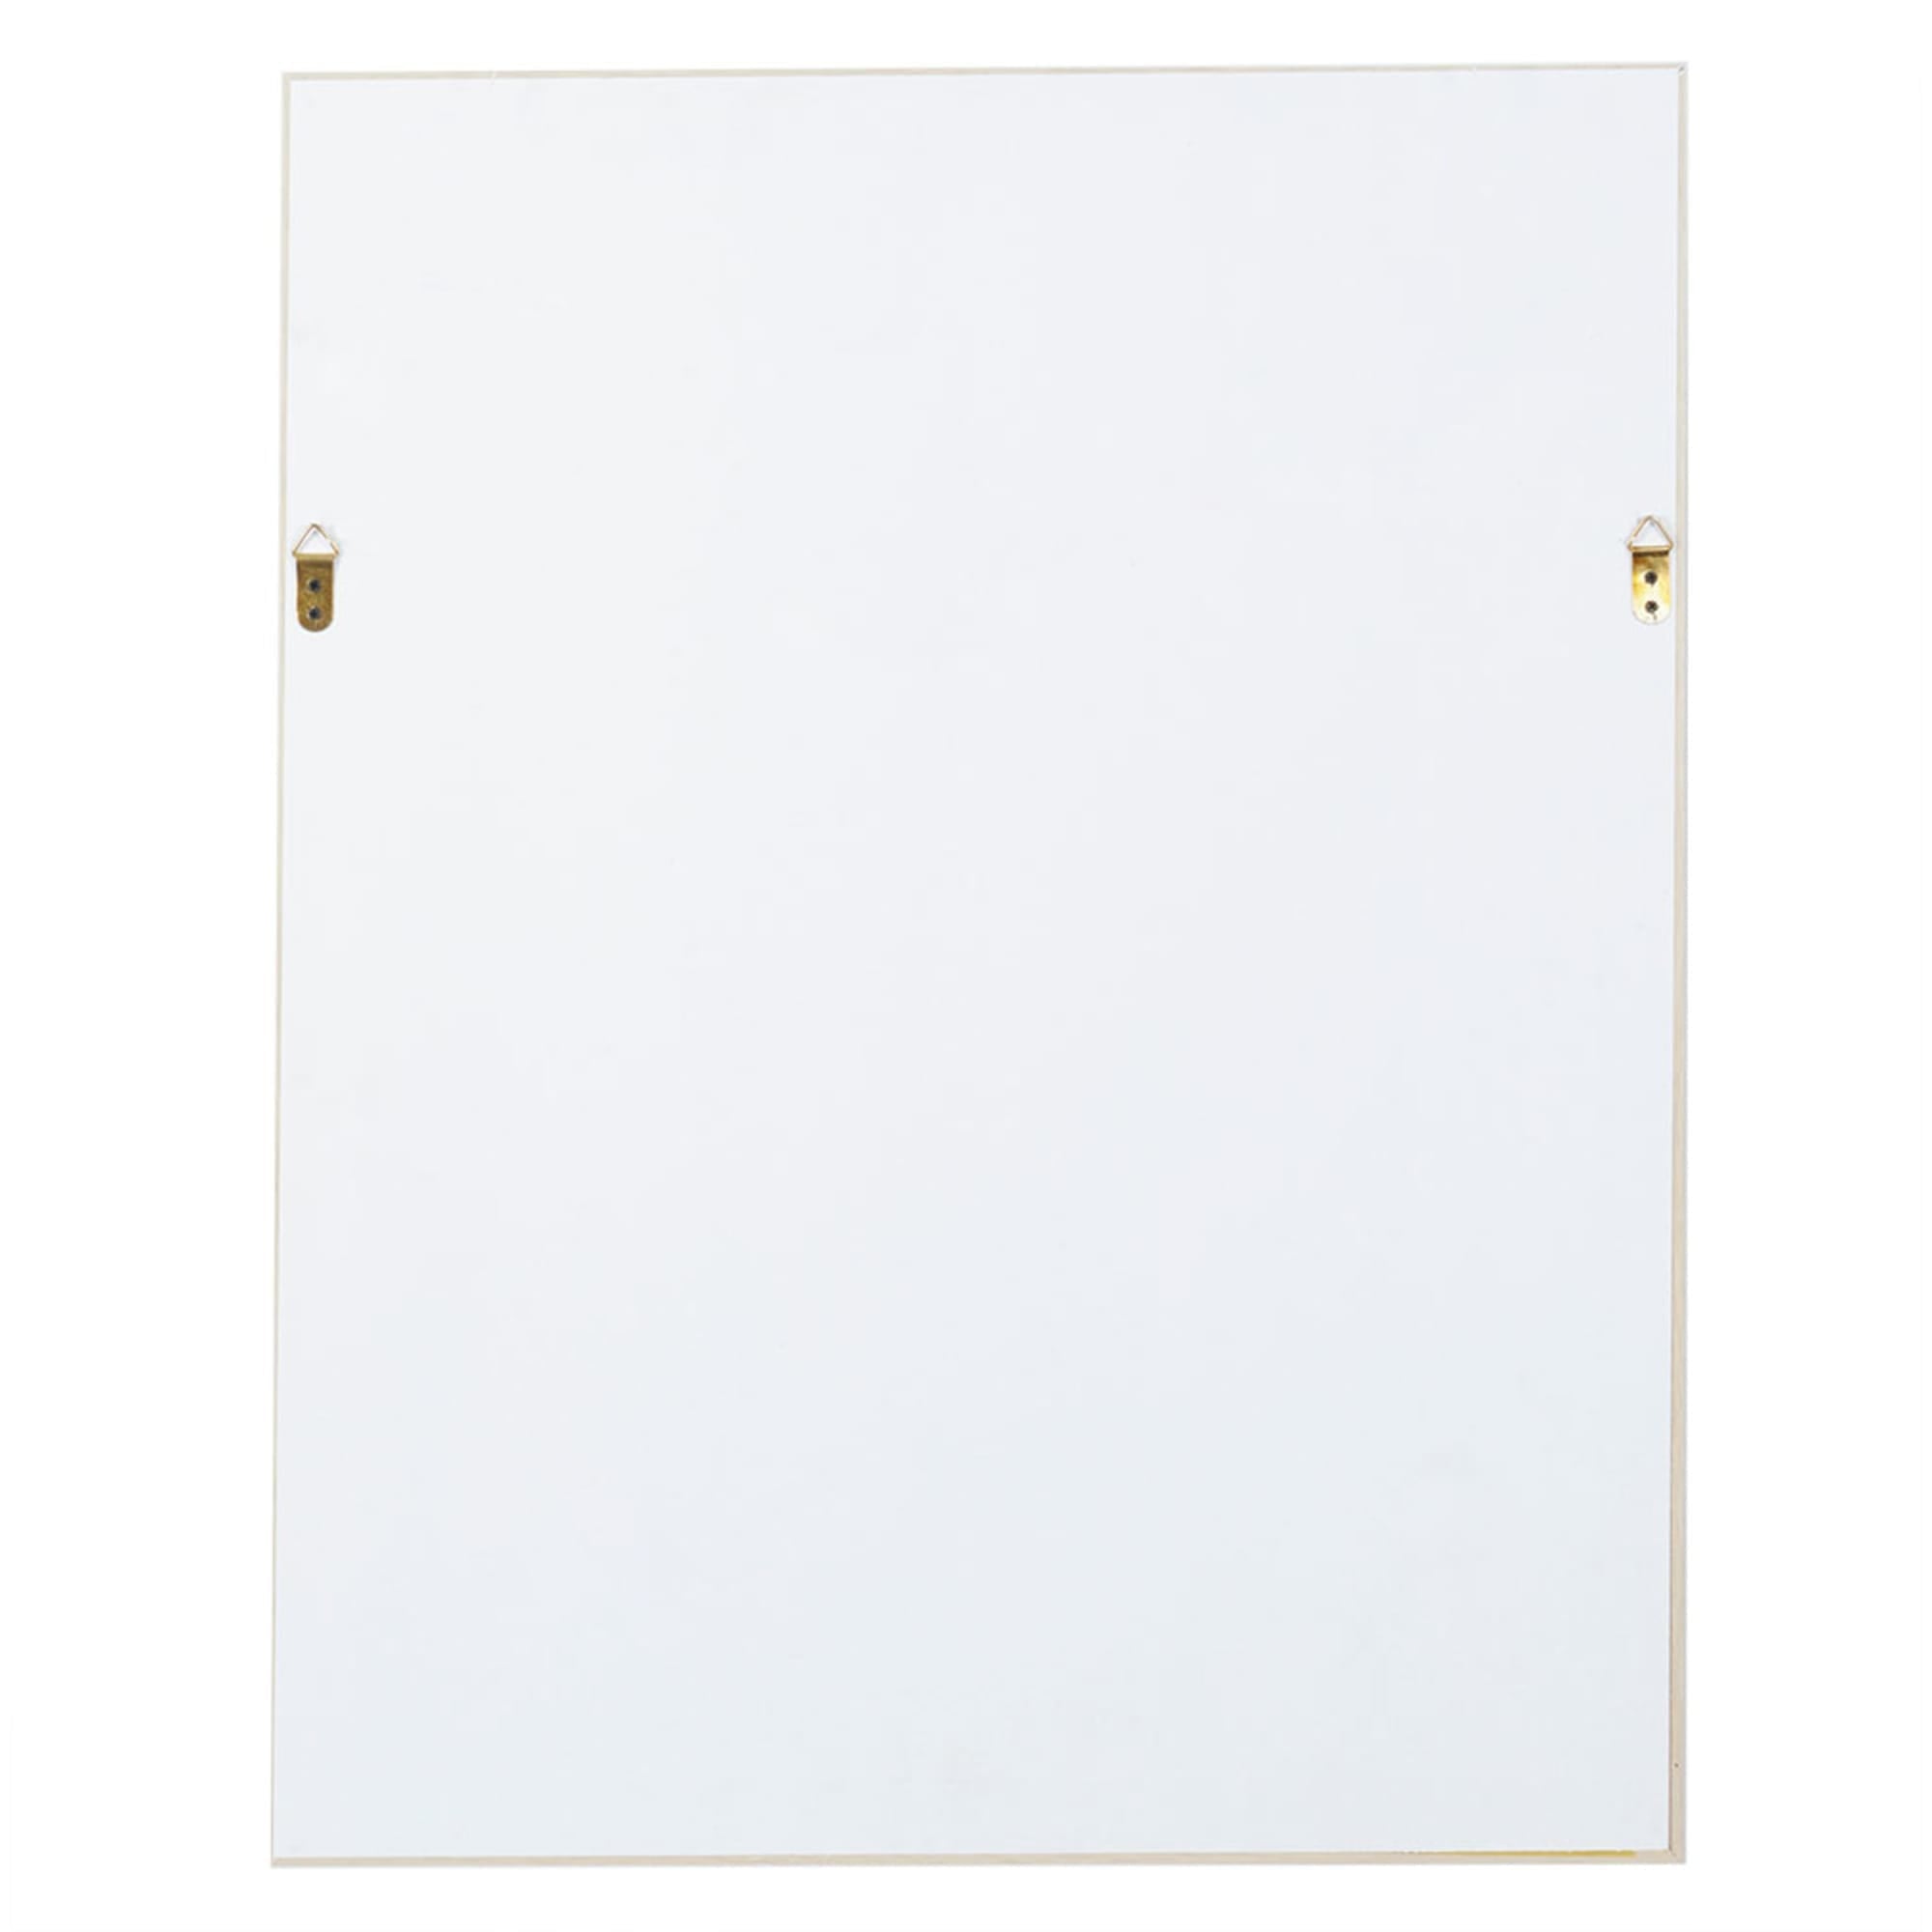 Home Basics Framed Painted MDF 18” x 24” Wall Mirror, Natural $10.00 EACH, CASE PACK OF 6